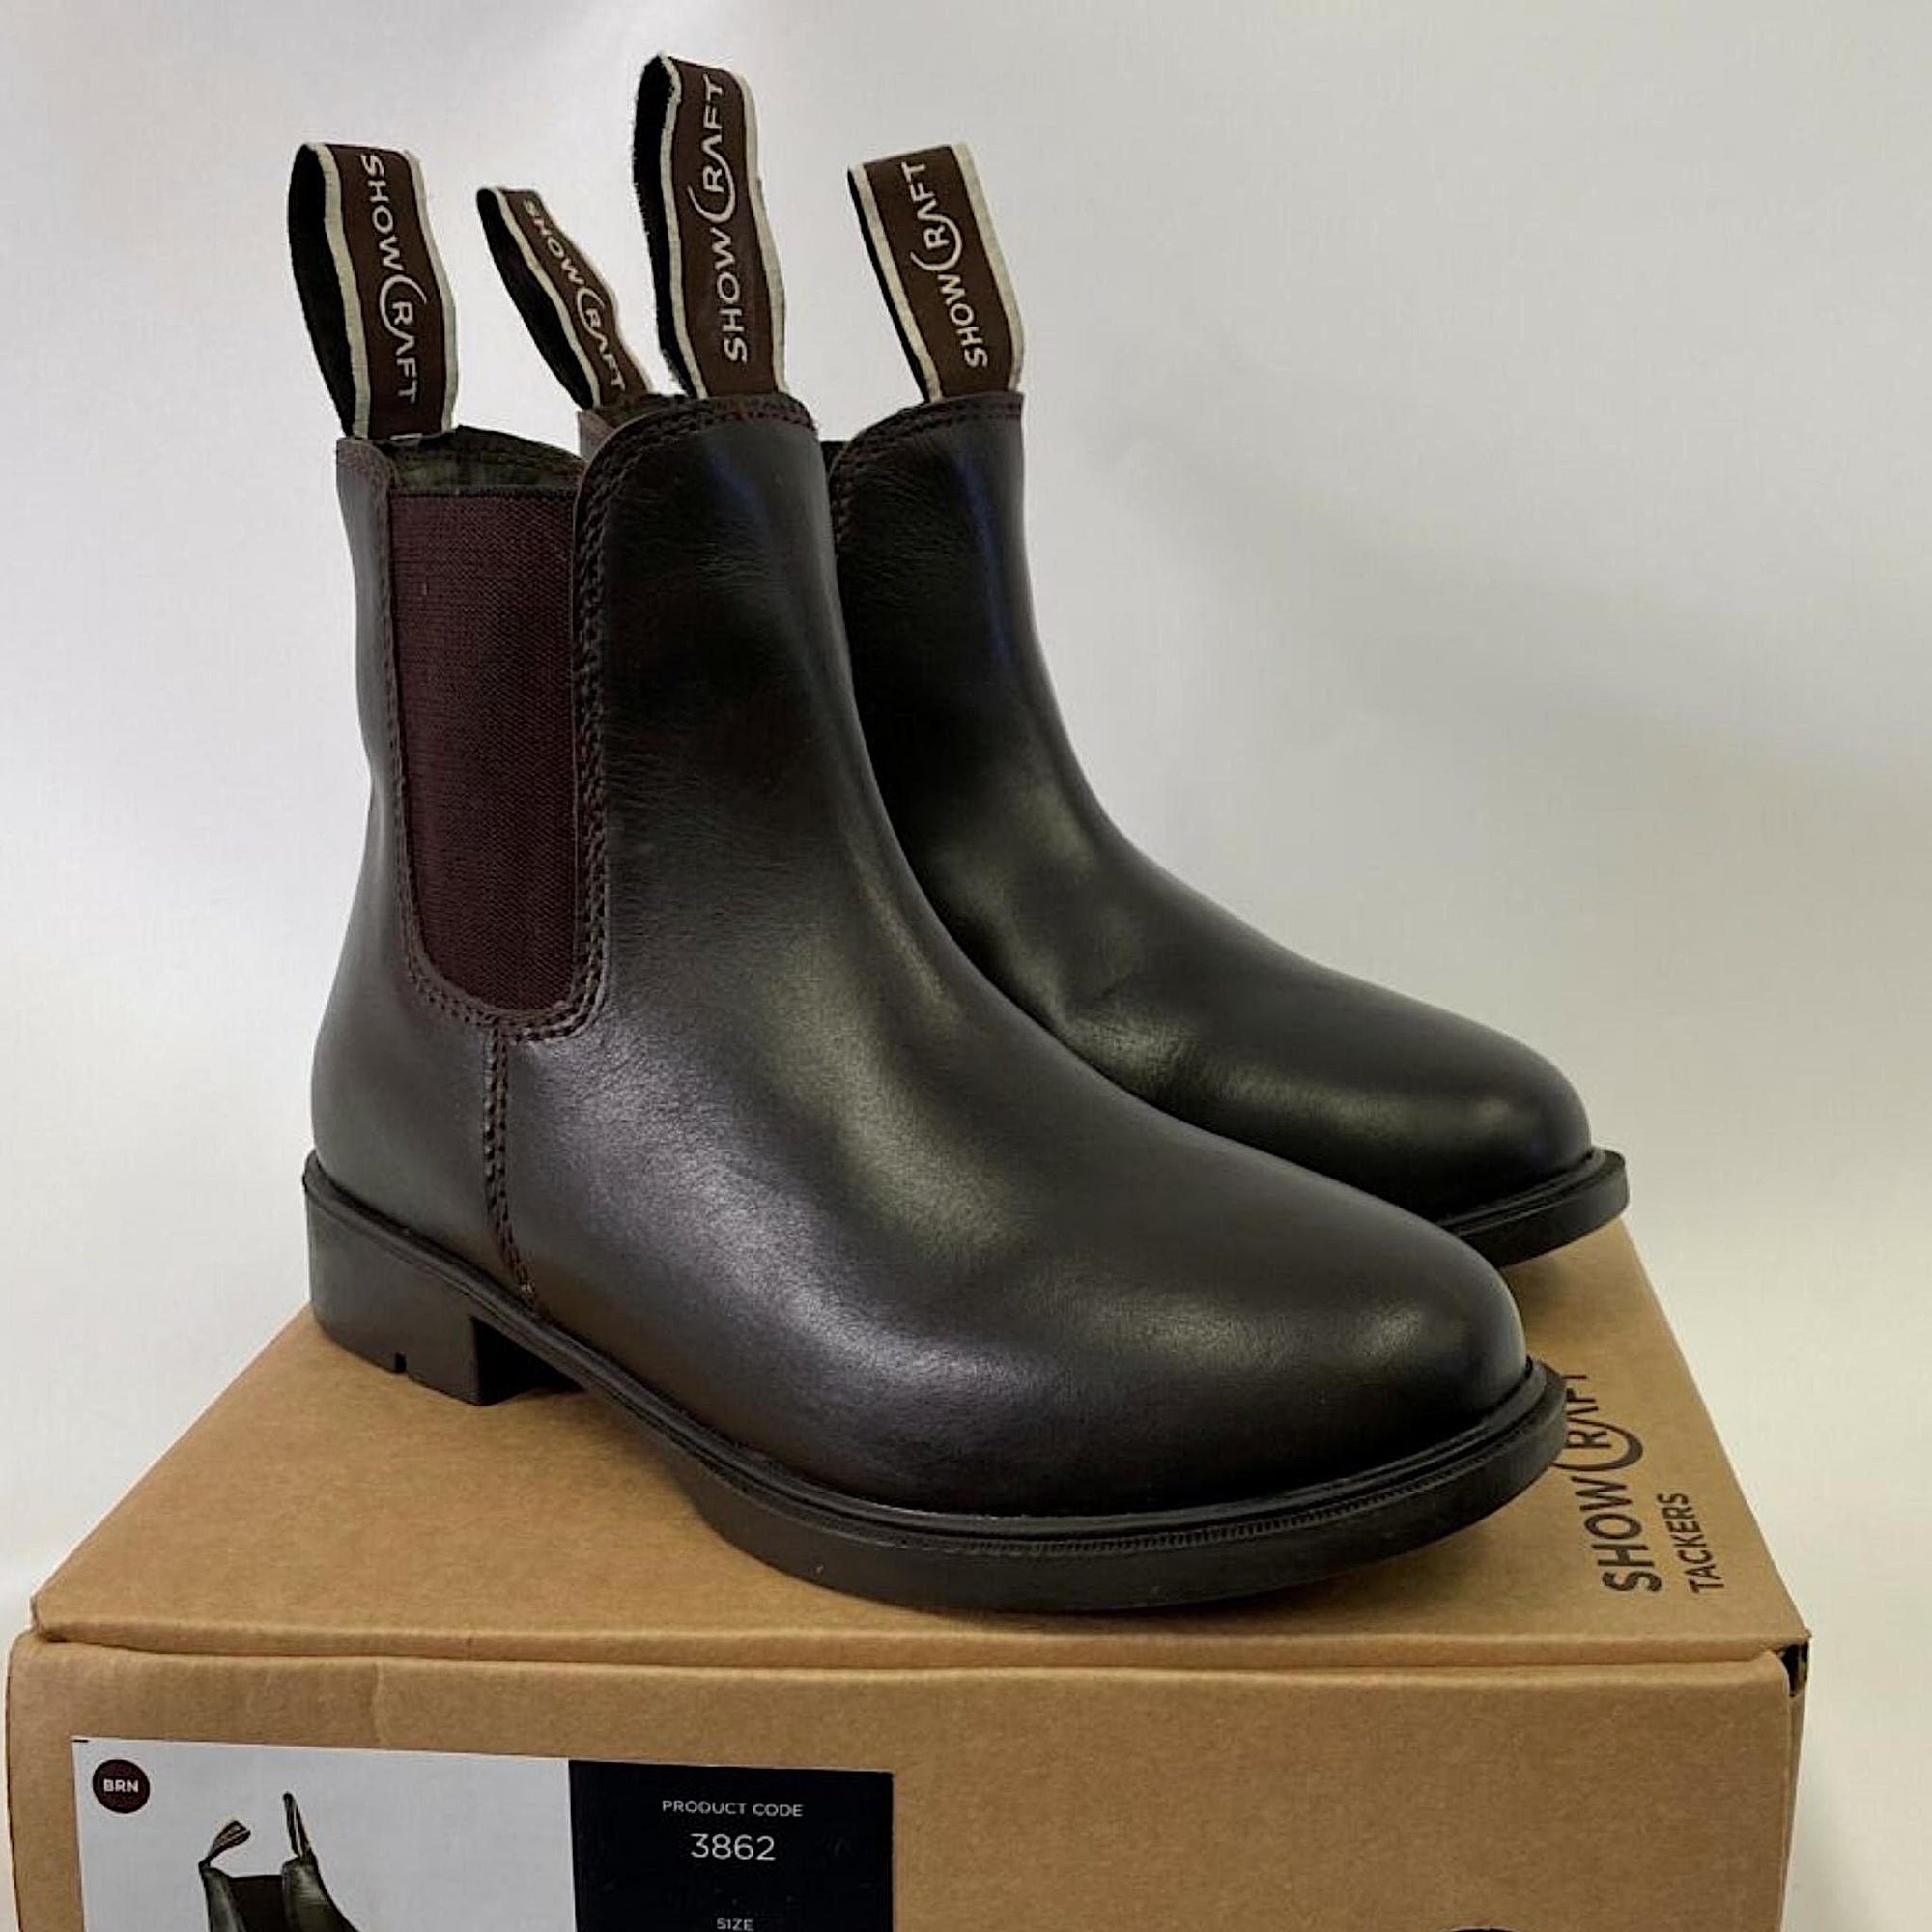 Brown leather boots with front and back pull tabs, on a box.